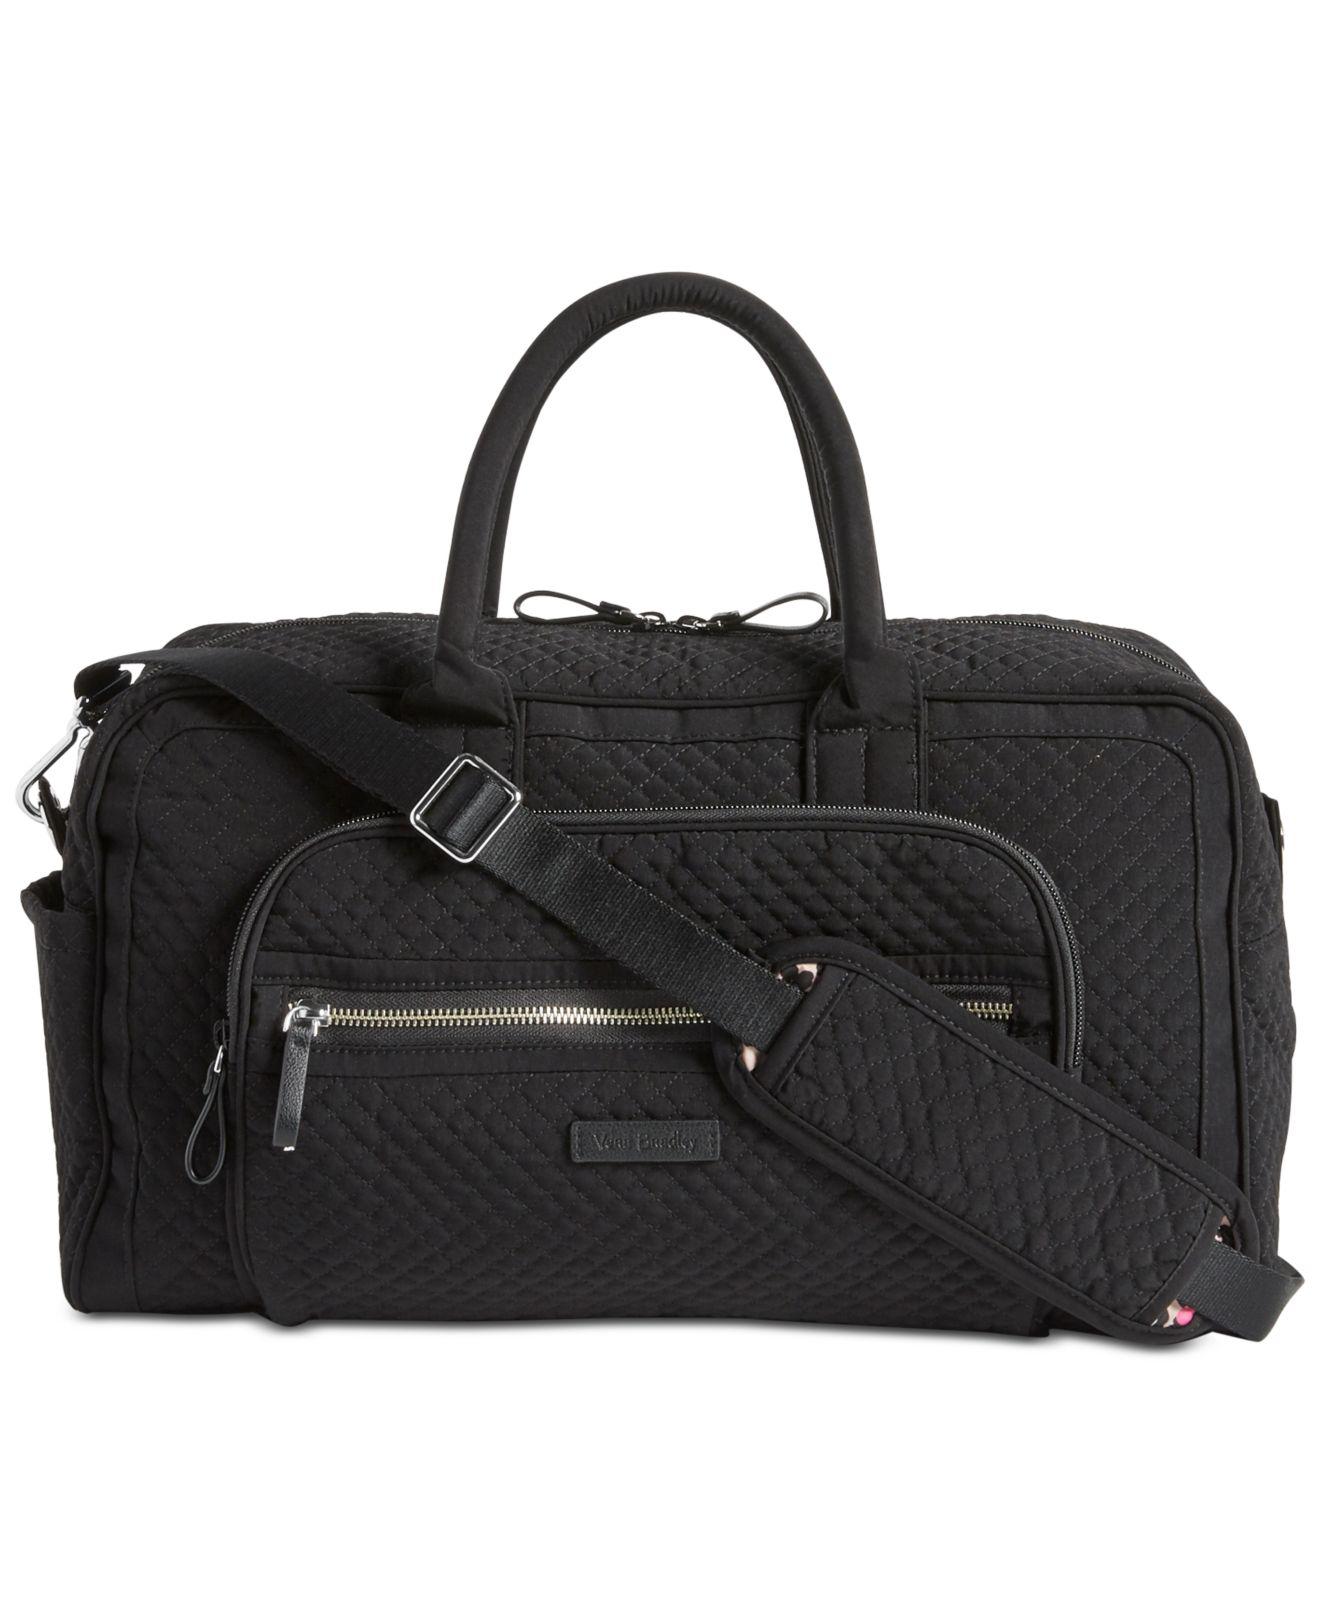 iconic compact weekender travel bag